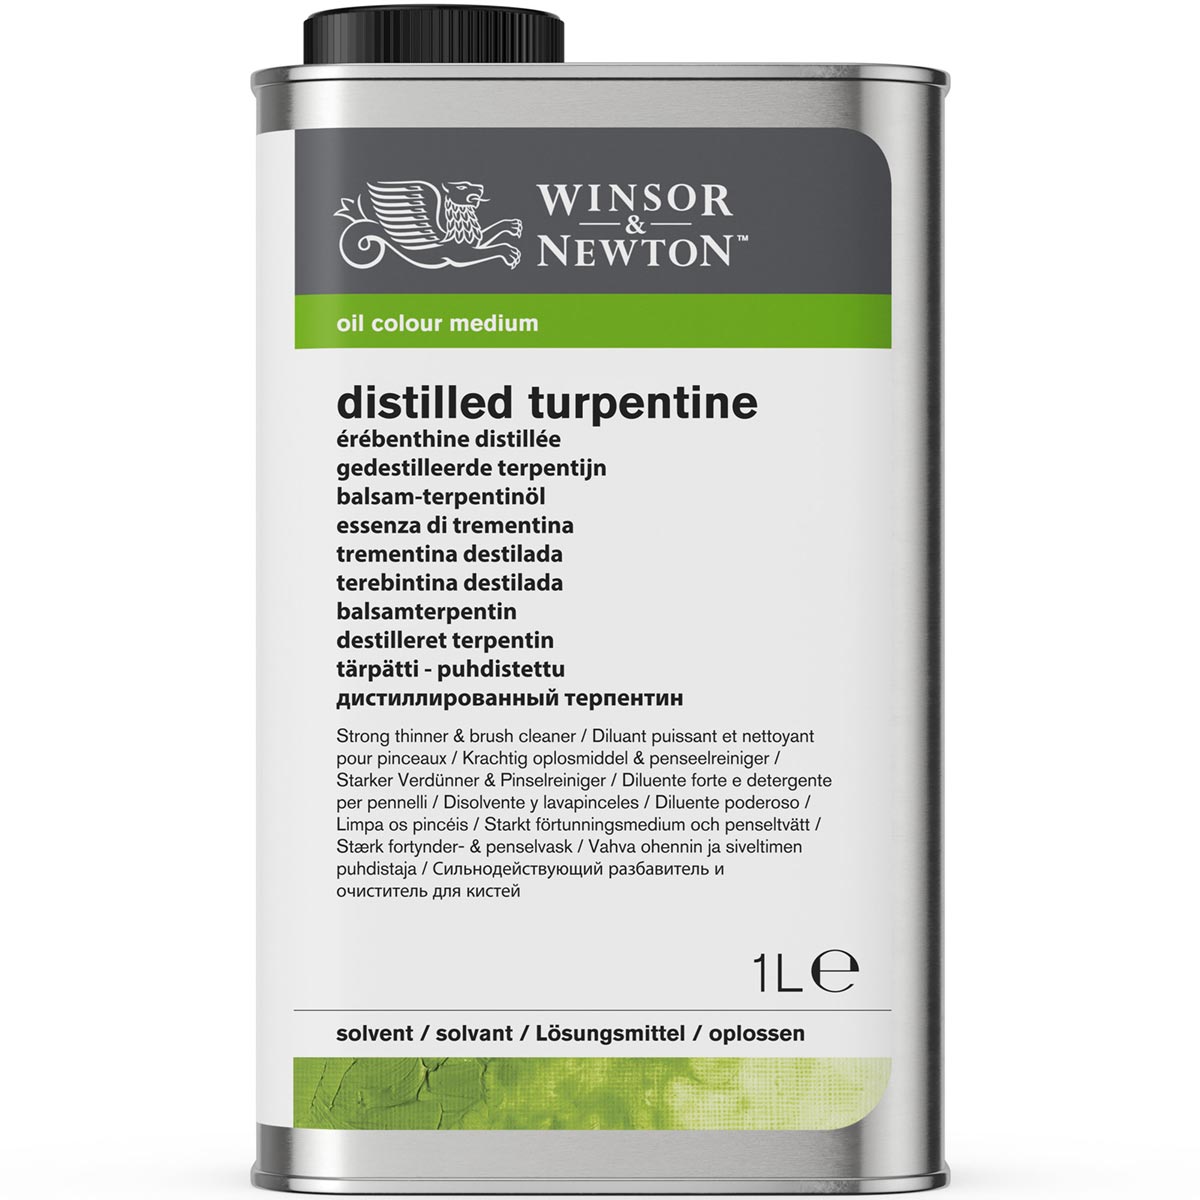 Winsor and Newton - English Distilled Turpentine - 1 Litre